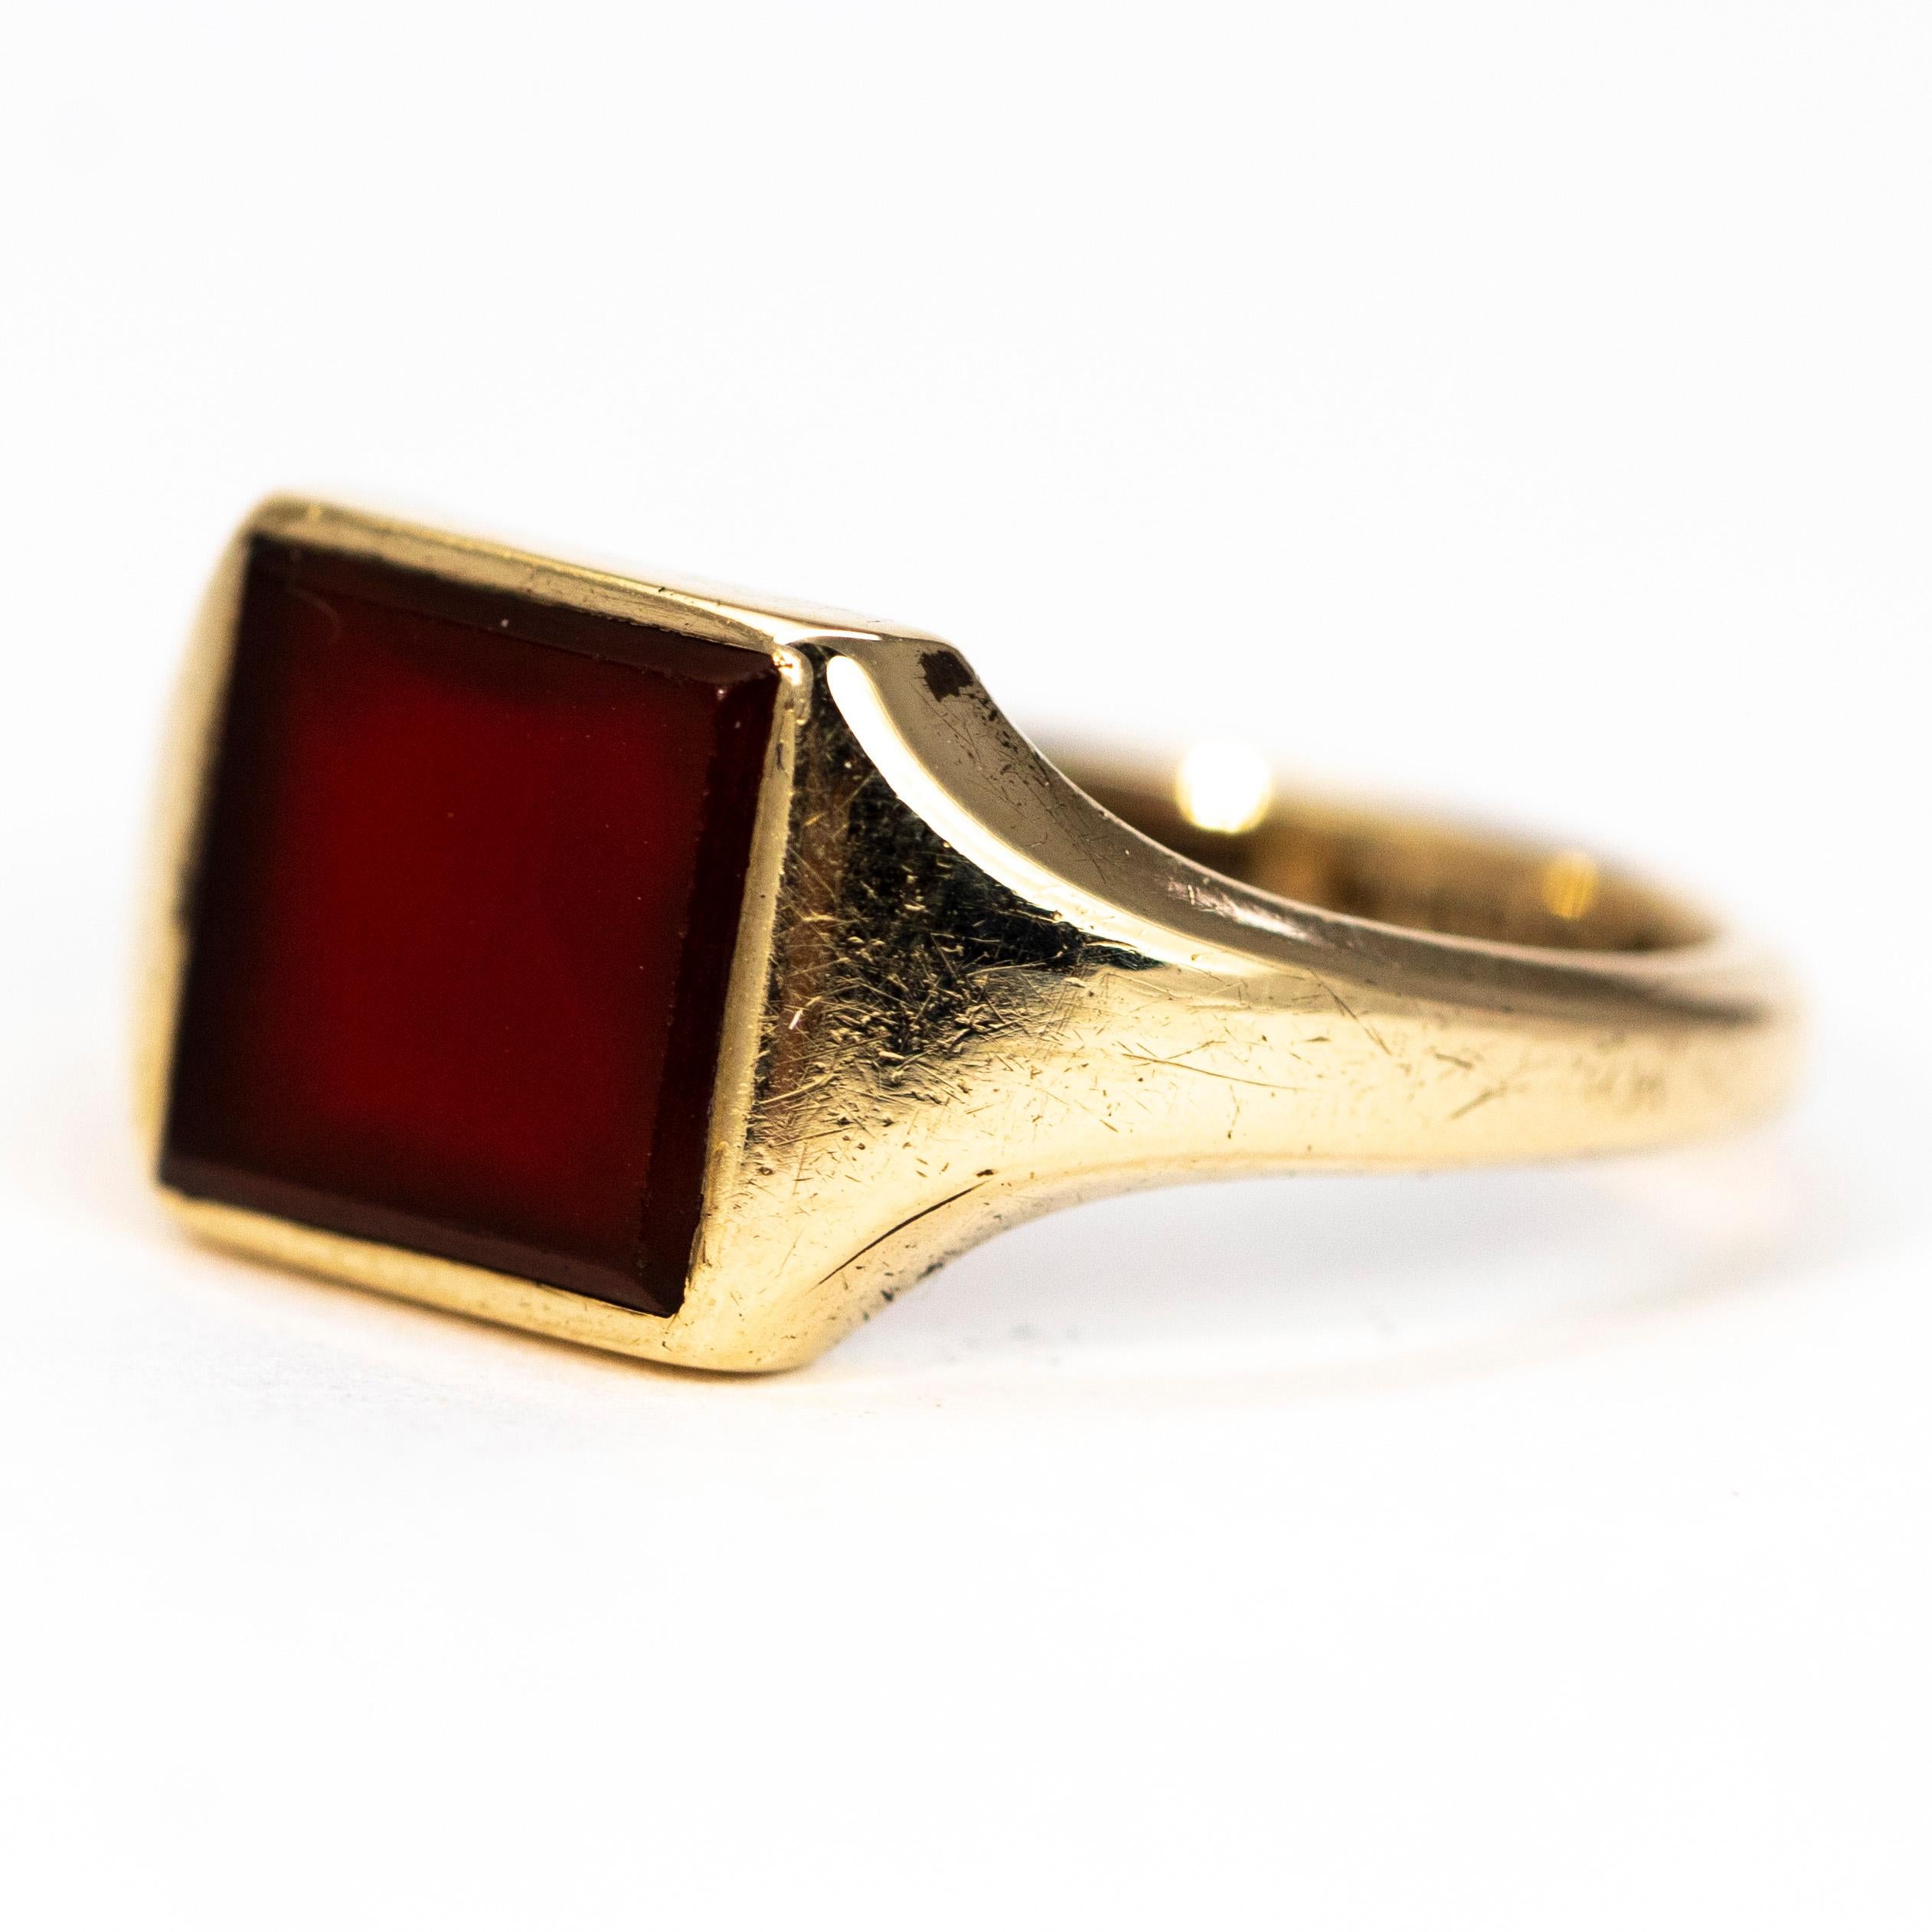 The carnelian stone in this signet ring is a deep rich brown colour that sits flush within the 9carat gold ring. Made in Birmingham, England.

Ring Size: R or 8 3/4
Stone Dimensions: 8.5 x 8.5mm 

Weight: 4.4g